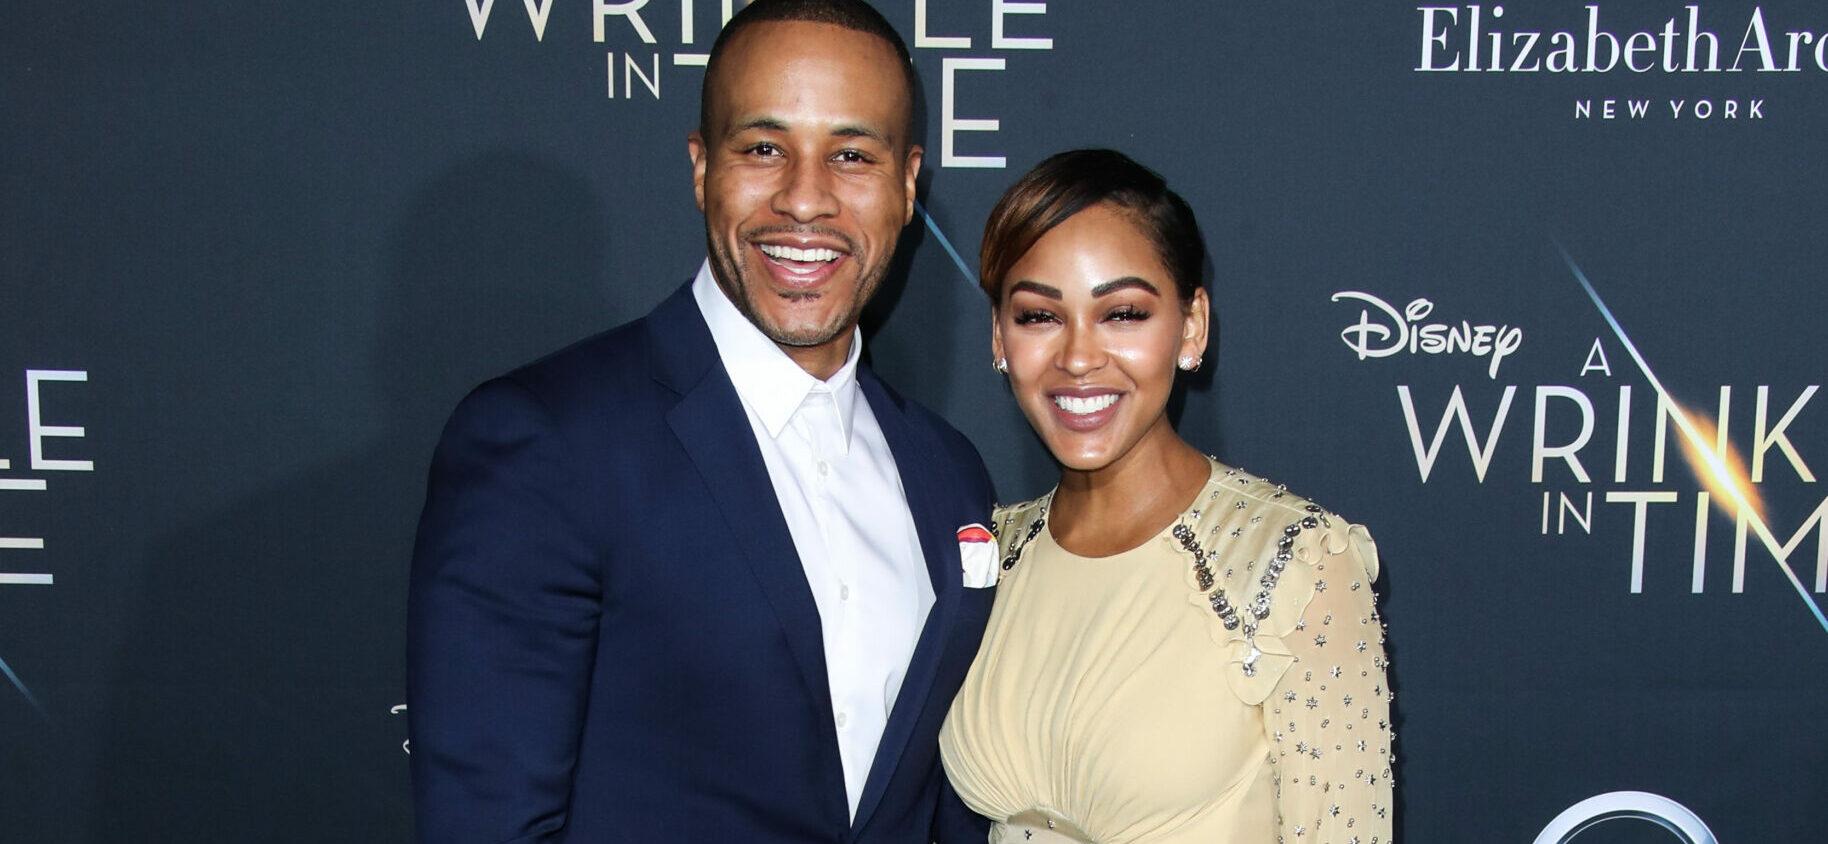 Meagan Good's Husband Claims They've Been Legally Separated For 4 Months